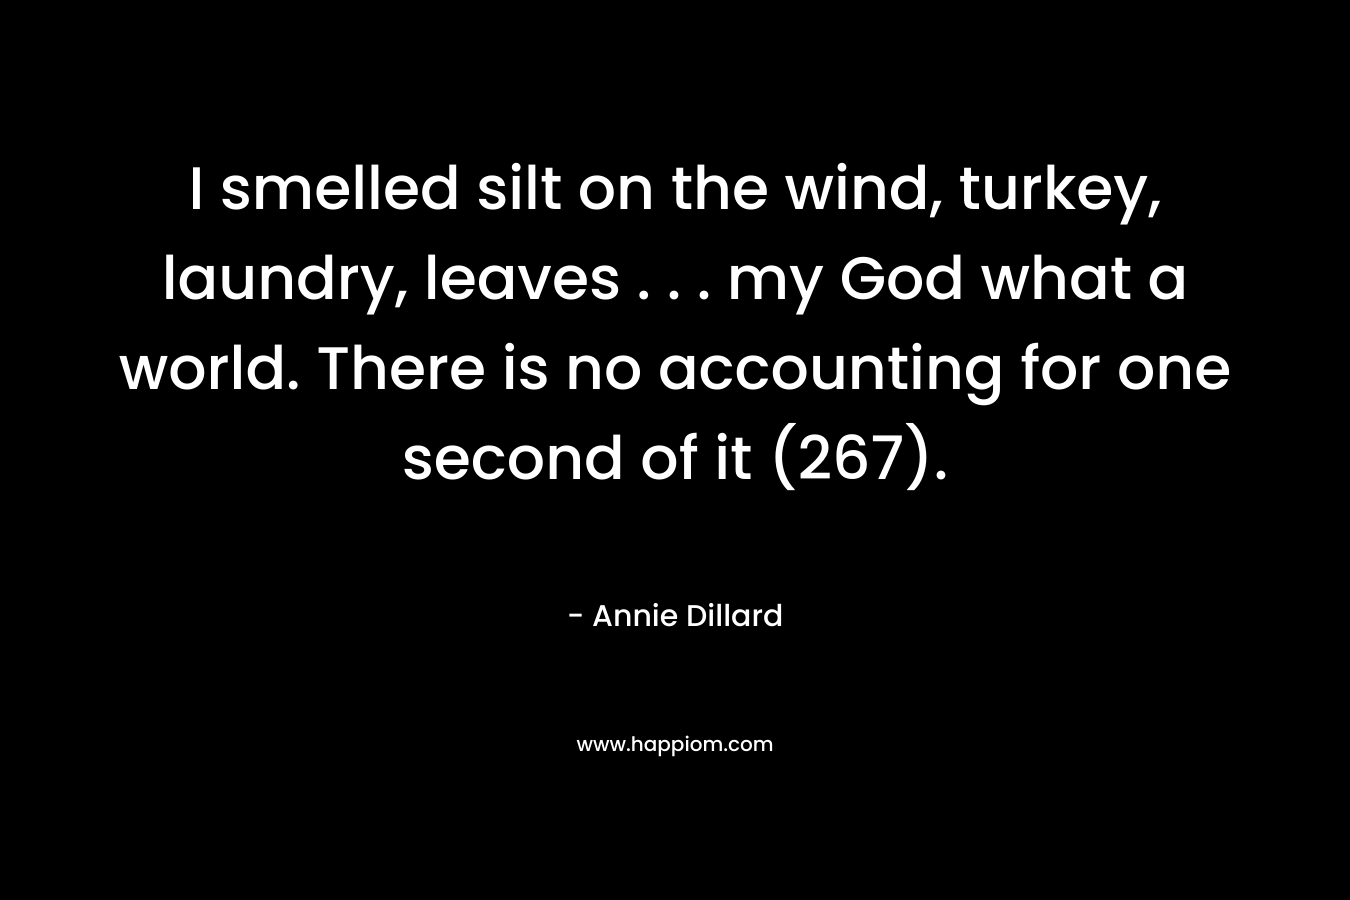 I smelled silt on the wind, turkey, laundry, leaves . . . my God what a world. There is no accounting for one second of it (267). – Annie Dillard